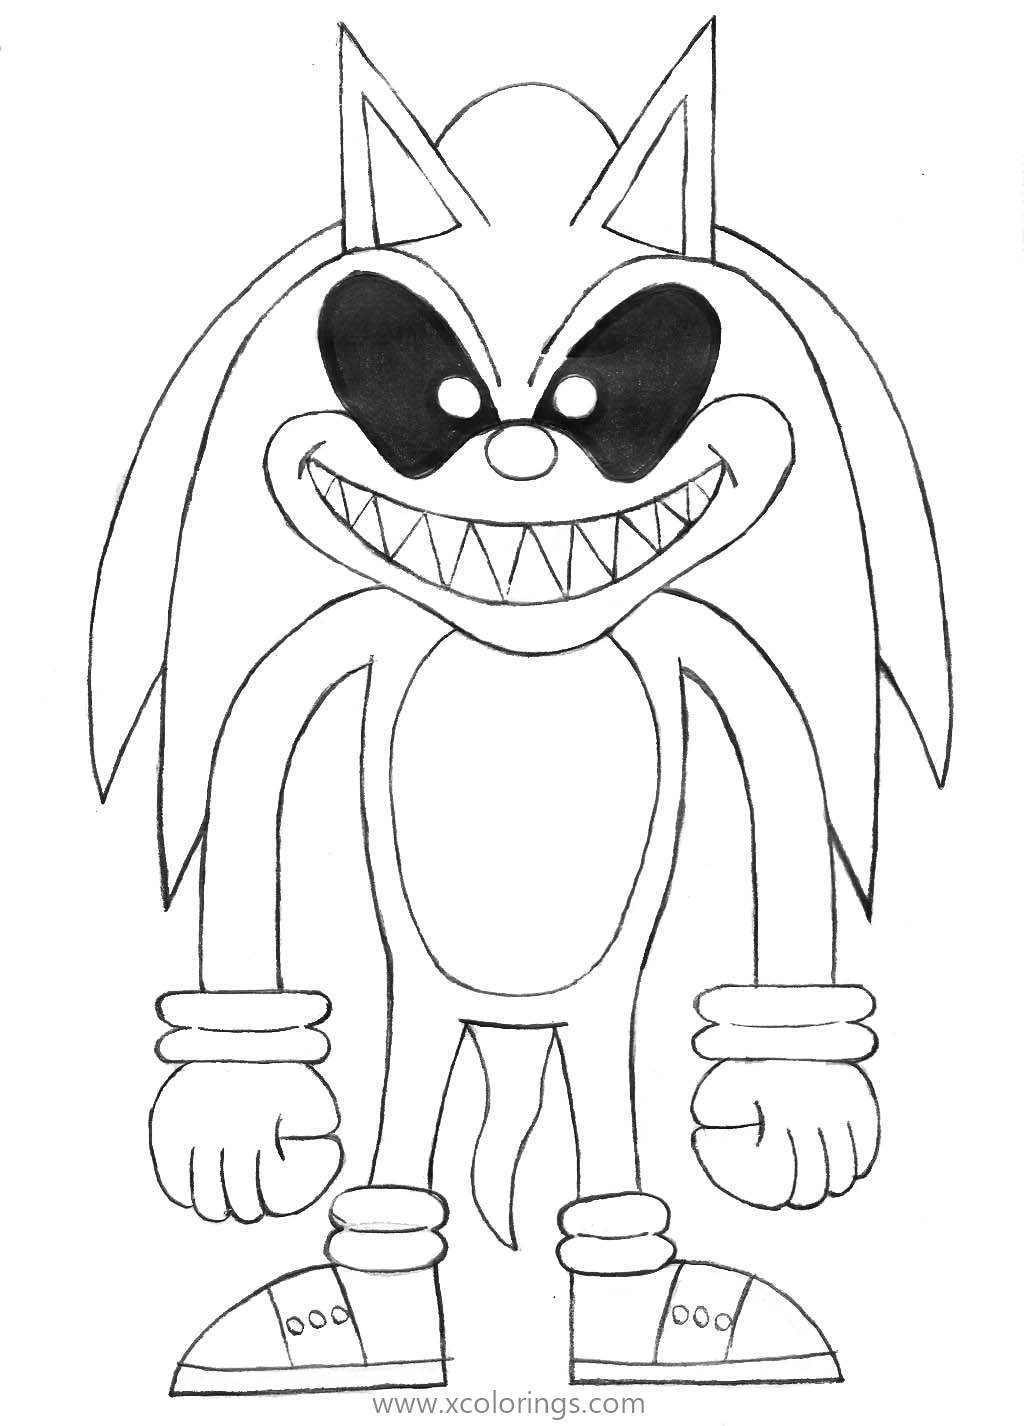 Sonic Exe Coloring Pages by horrorshowfrea - XColorings.com